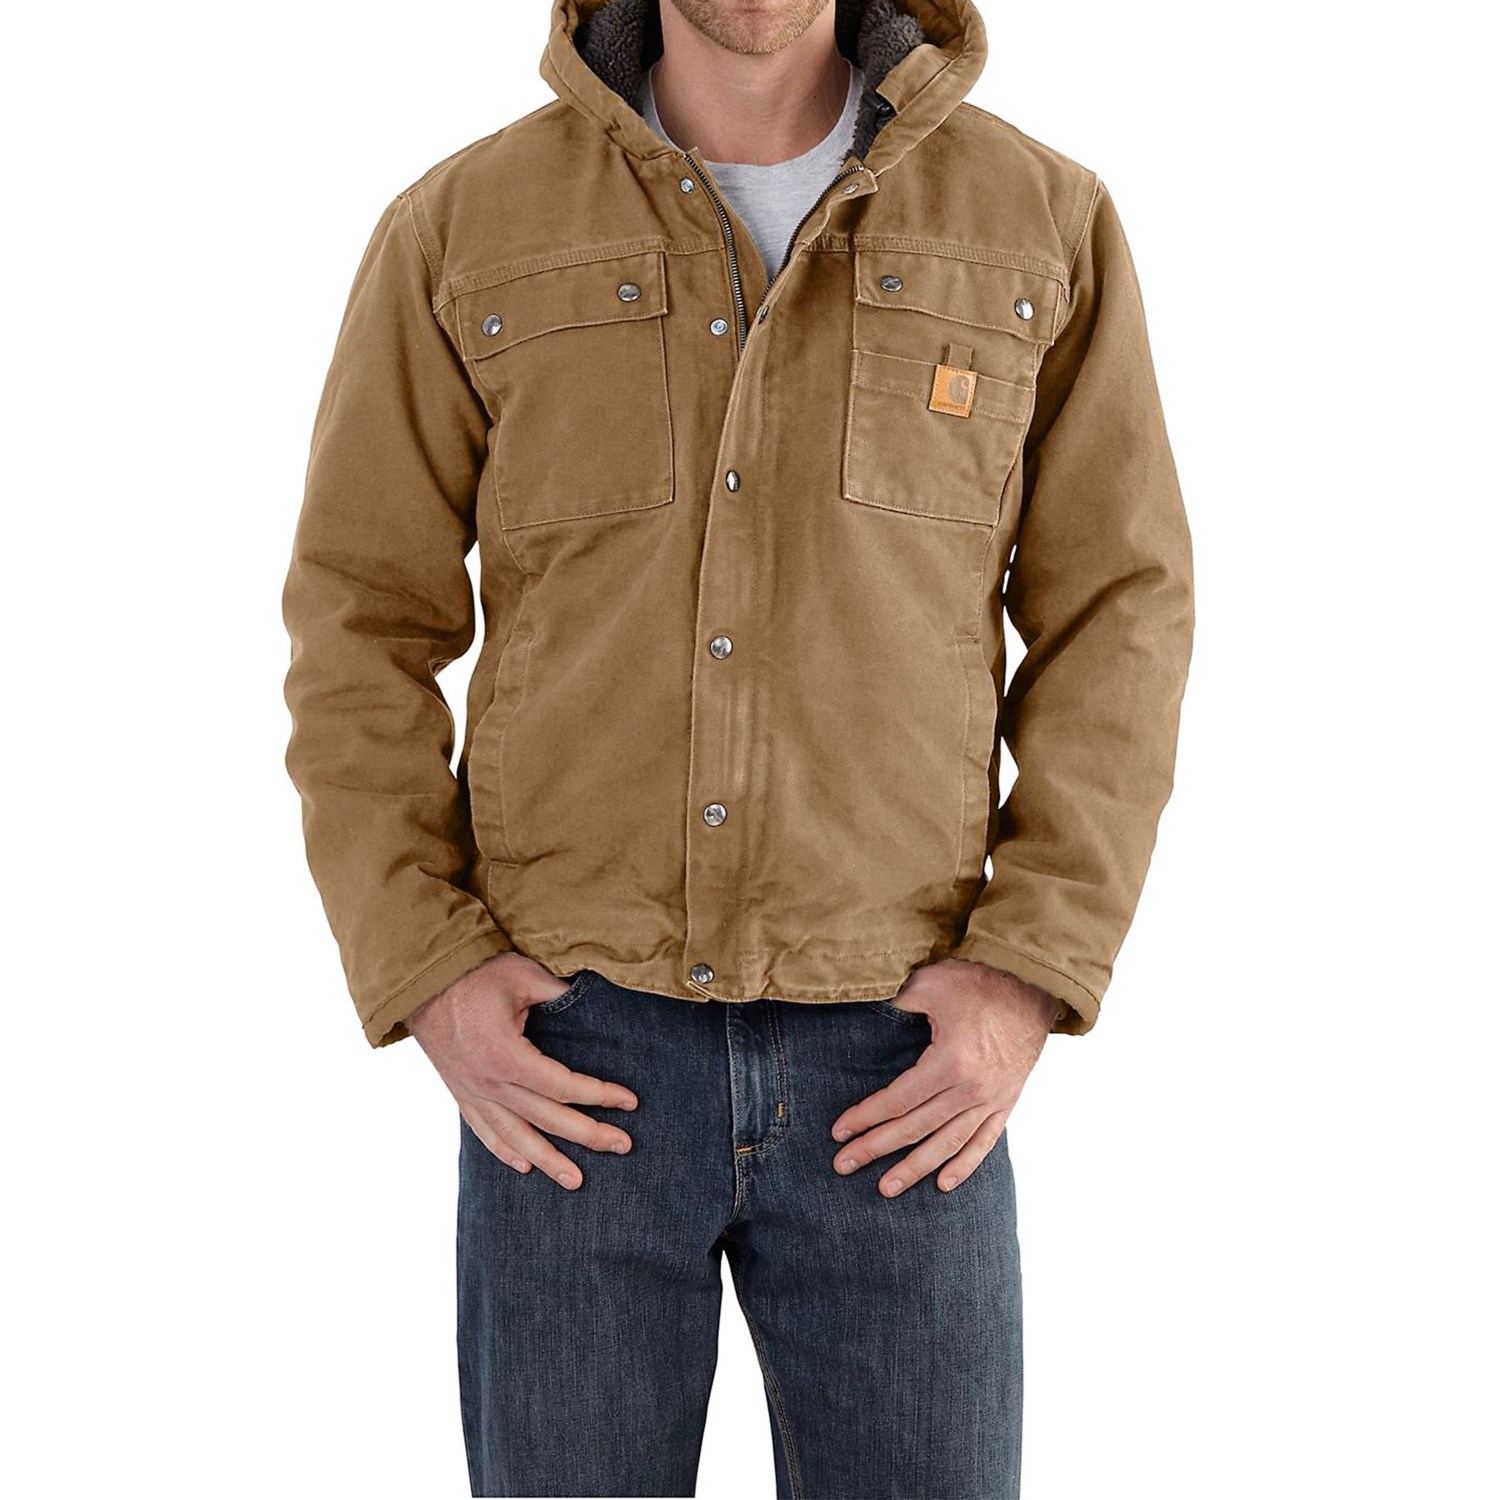 Carhartt Bartlett Sherpa-Lined Jacket (For Big and Tall Men)